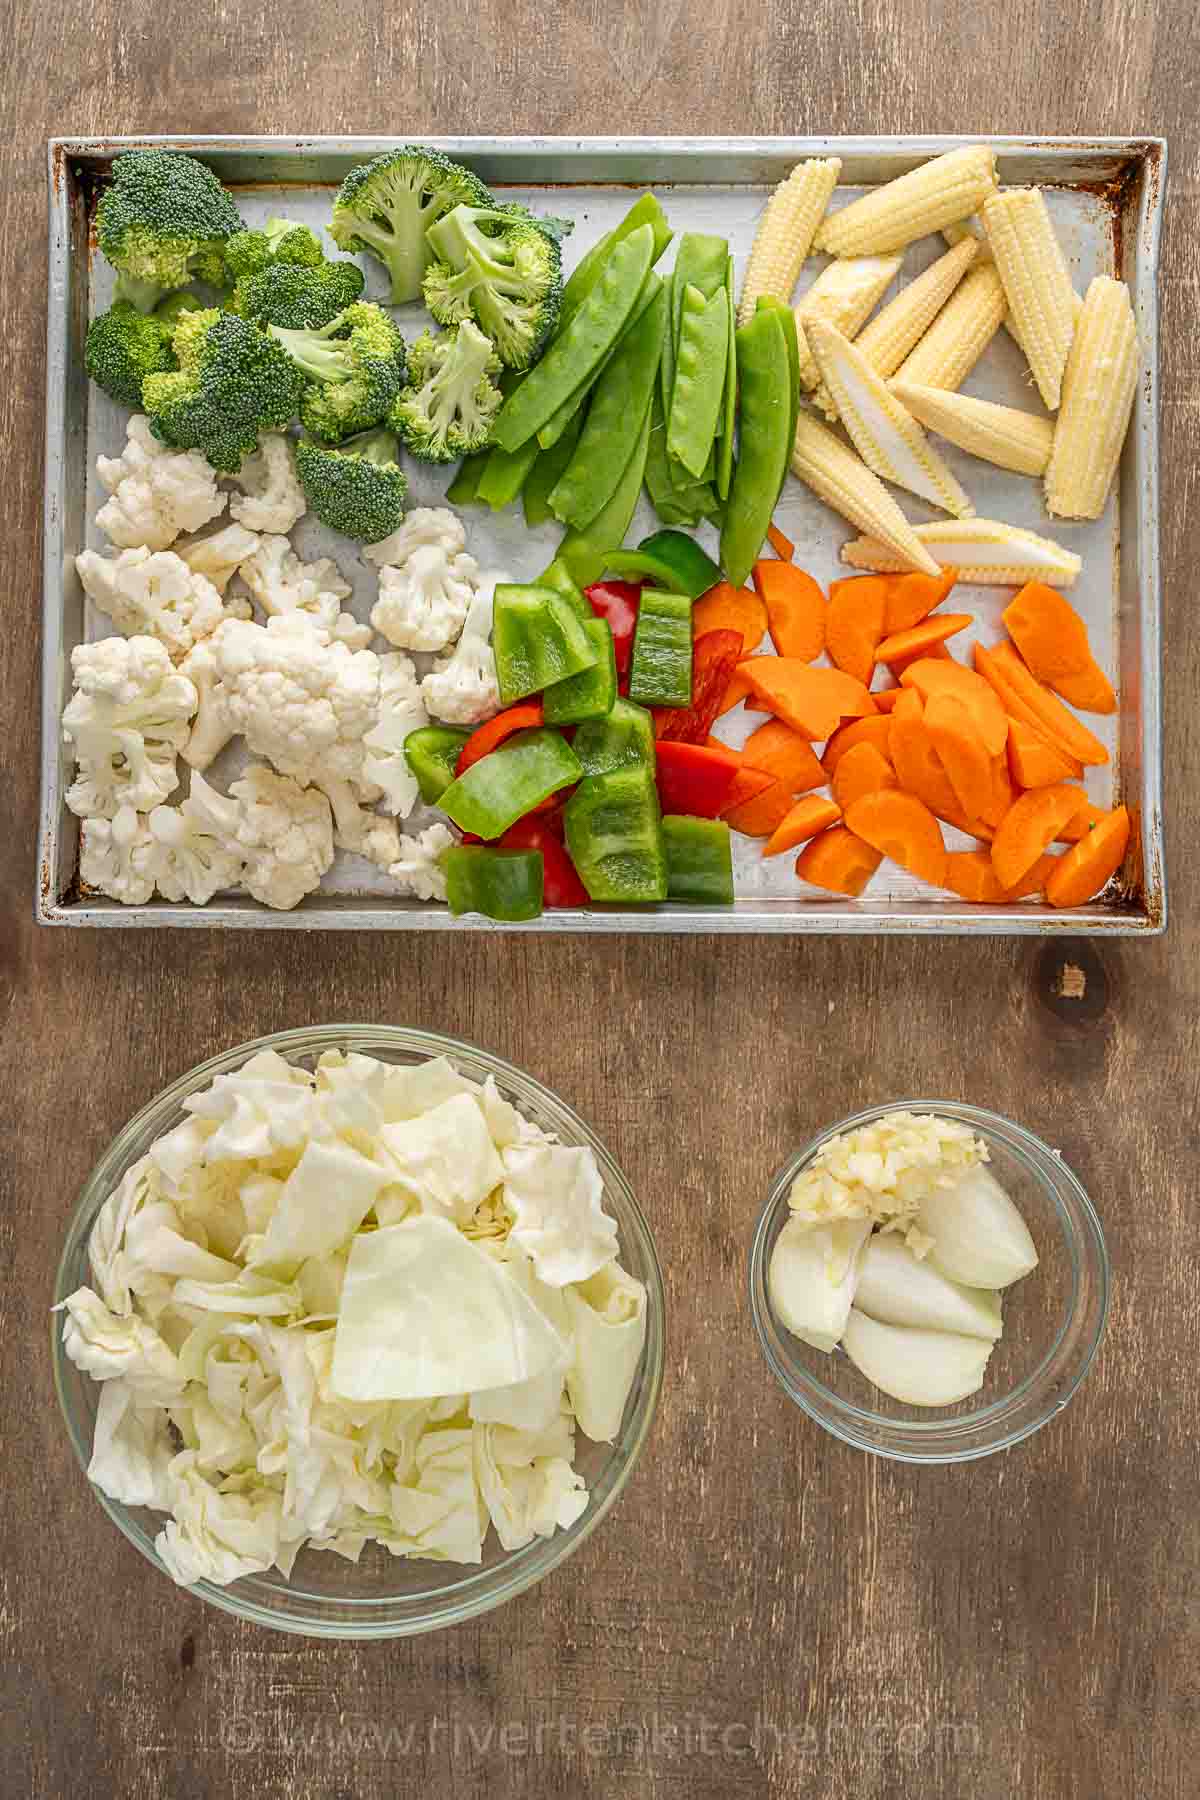 vegetables: cauliflower, broccoli, baby corn, bell pepper, cabbage and carrots.